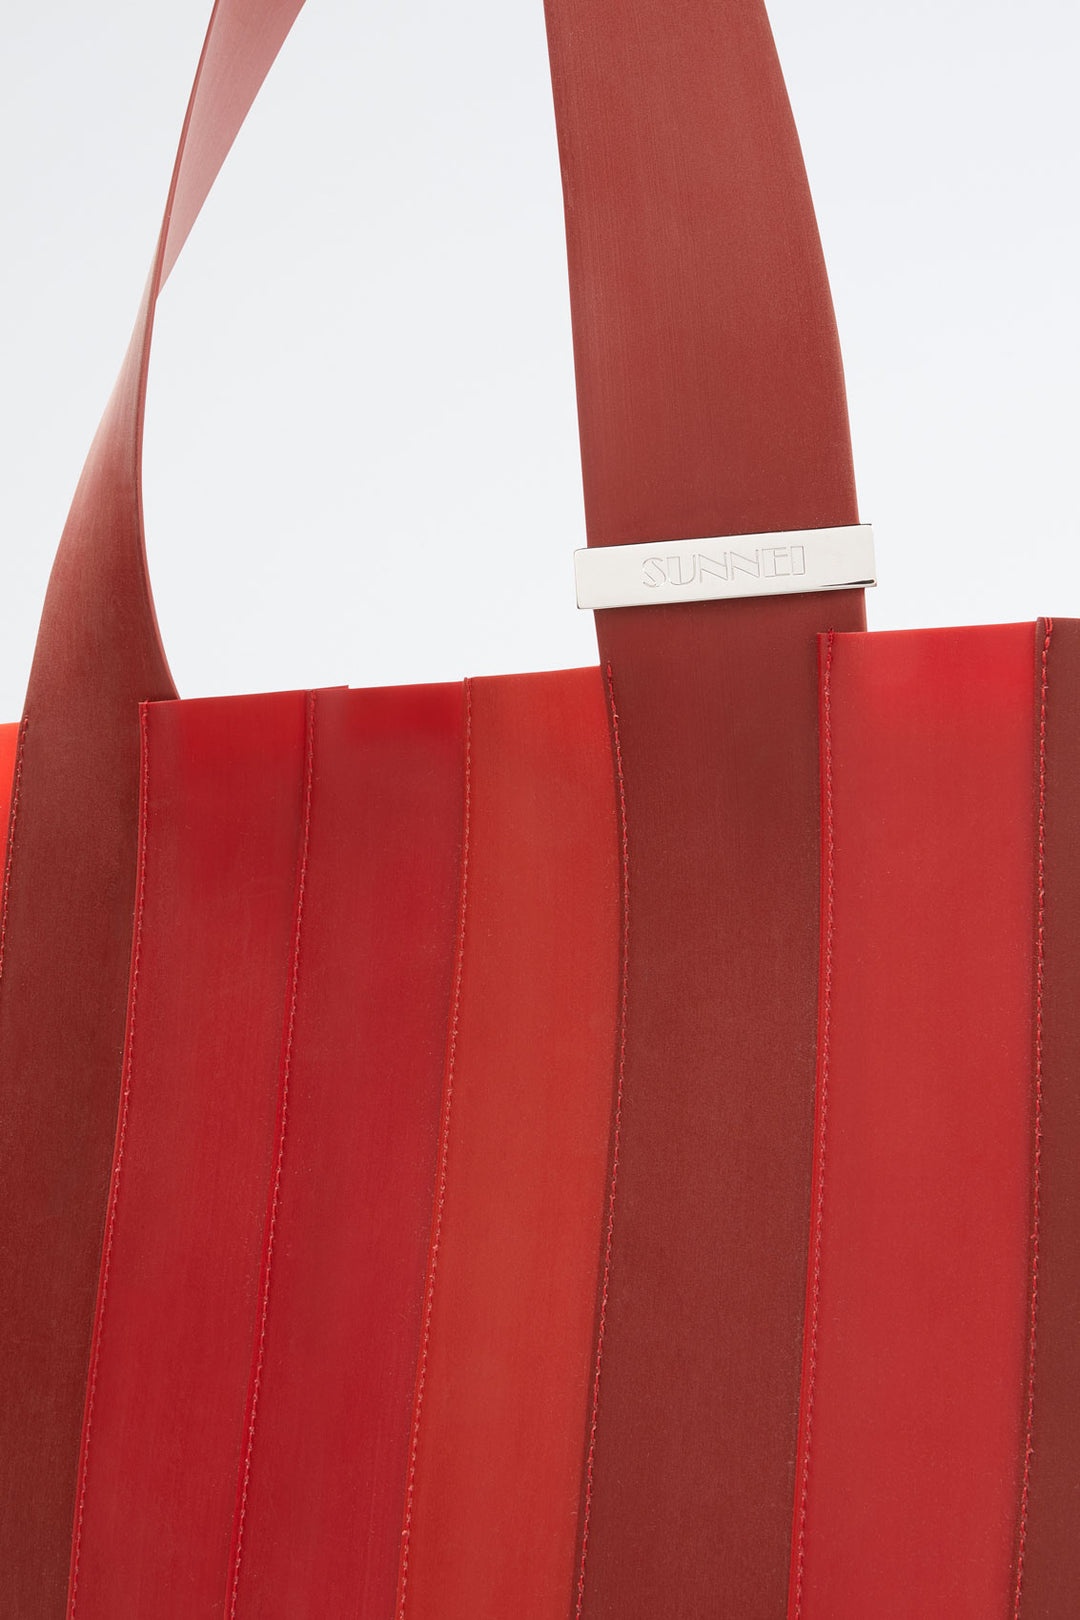 GRADIENT RED PUDDING PARALLELEPIPEDO BAG - 3